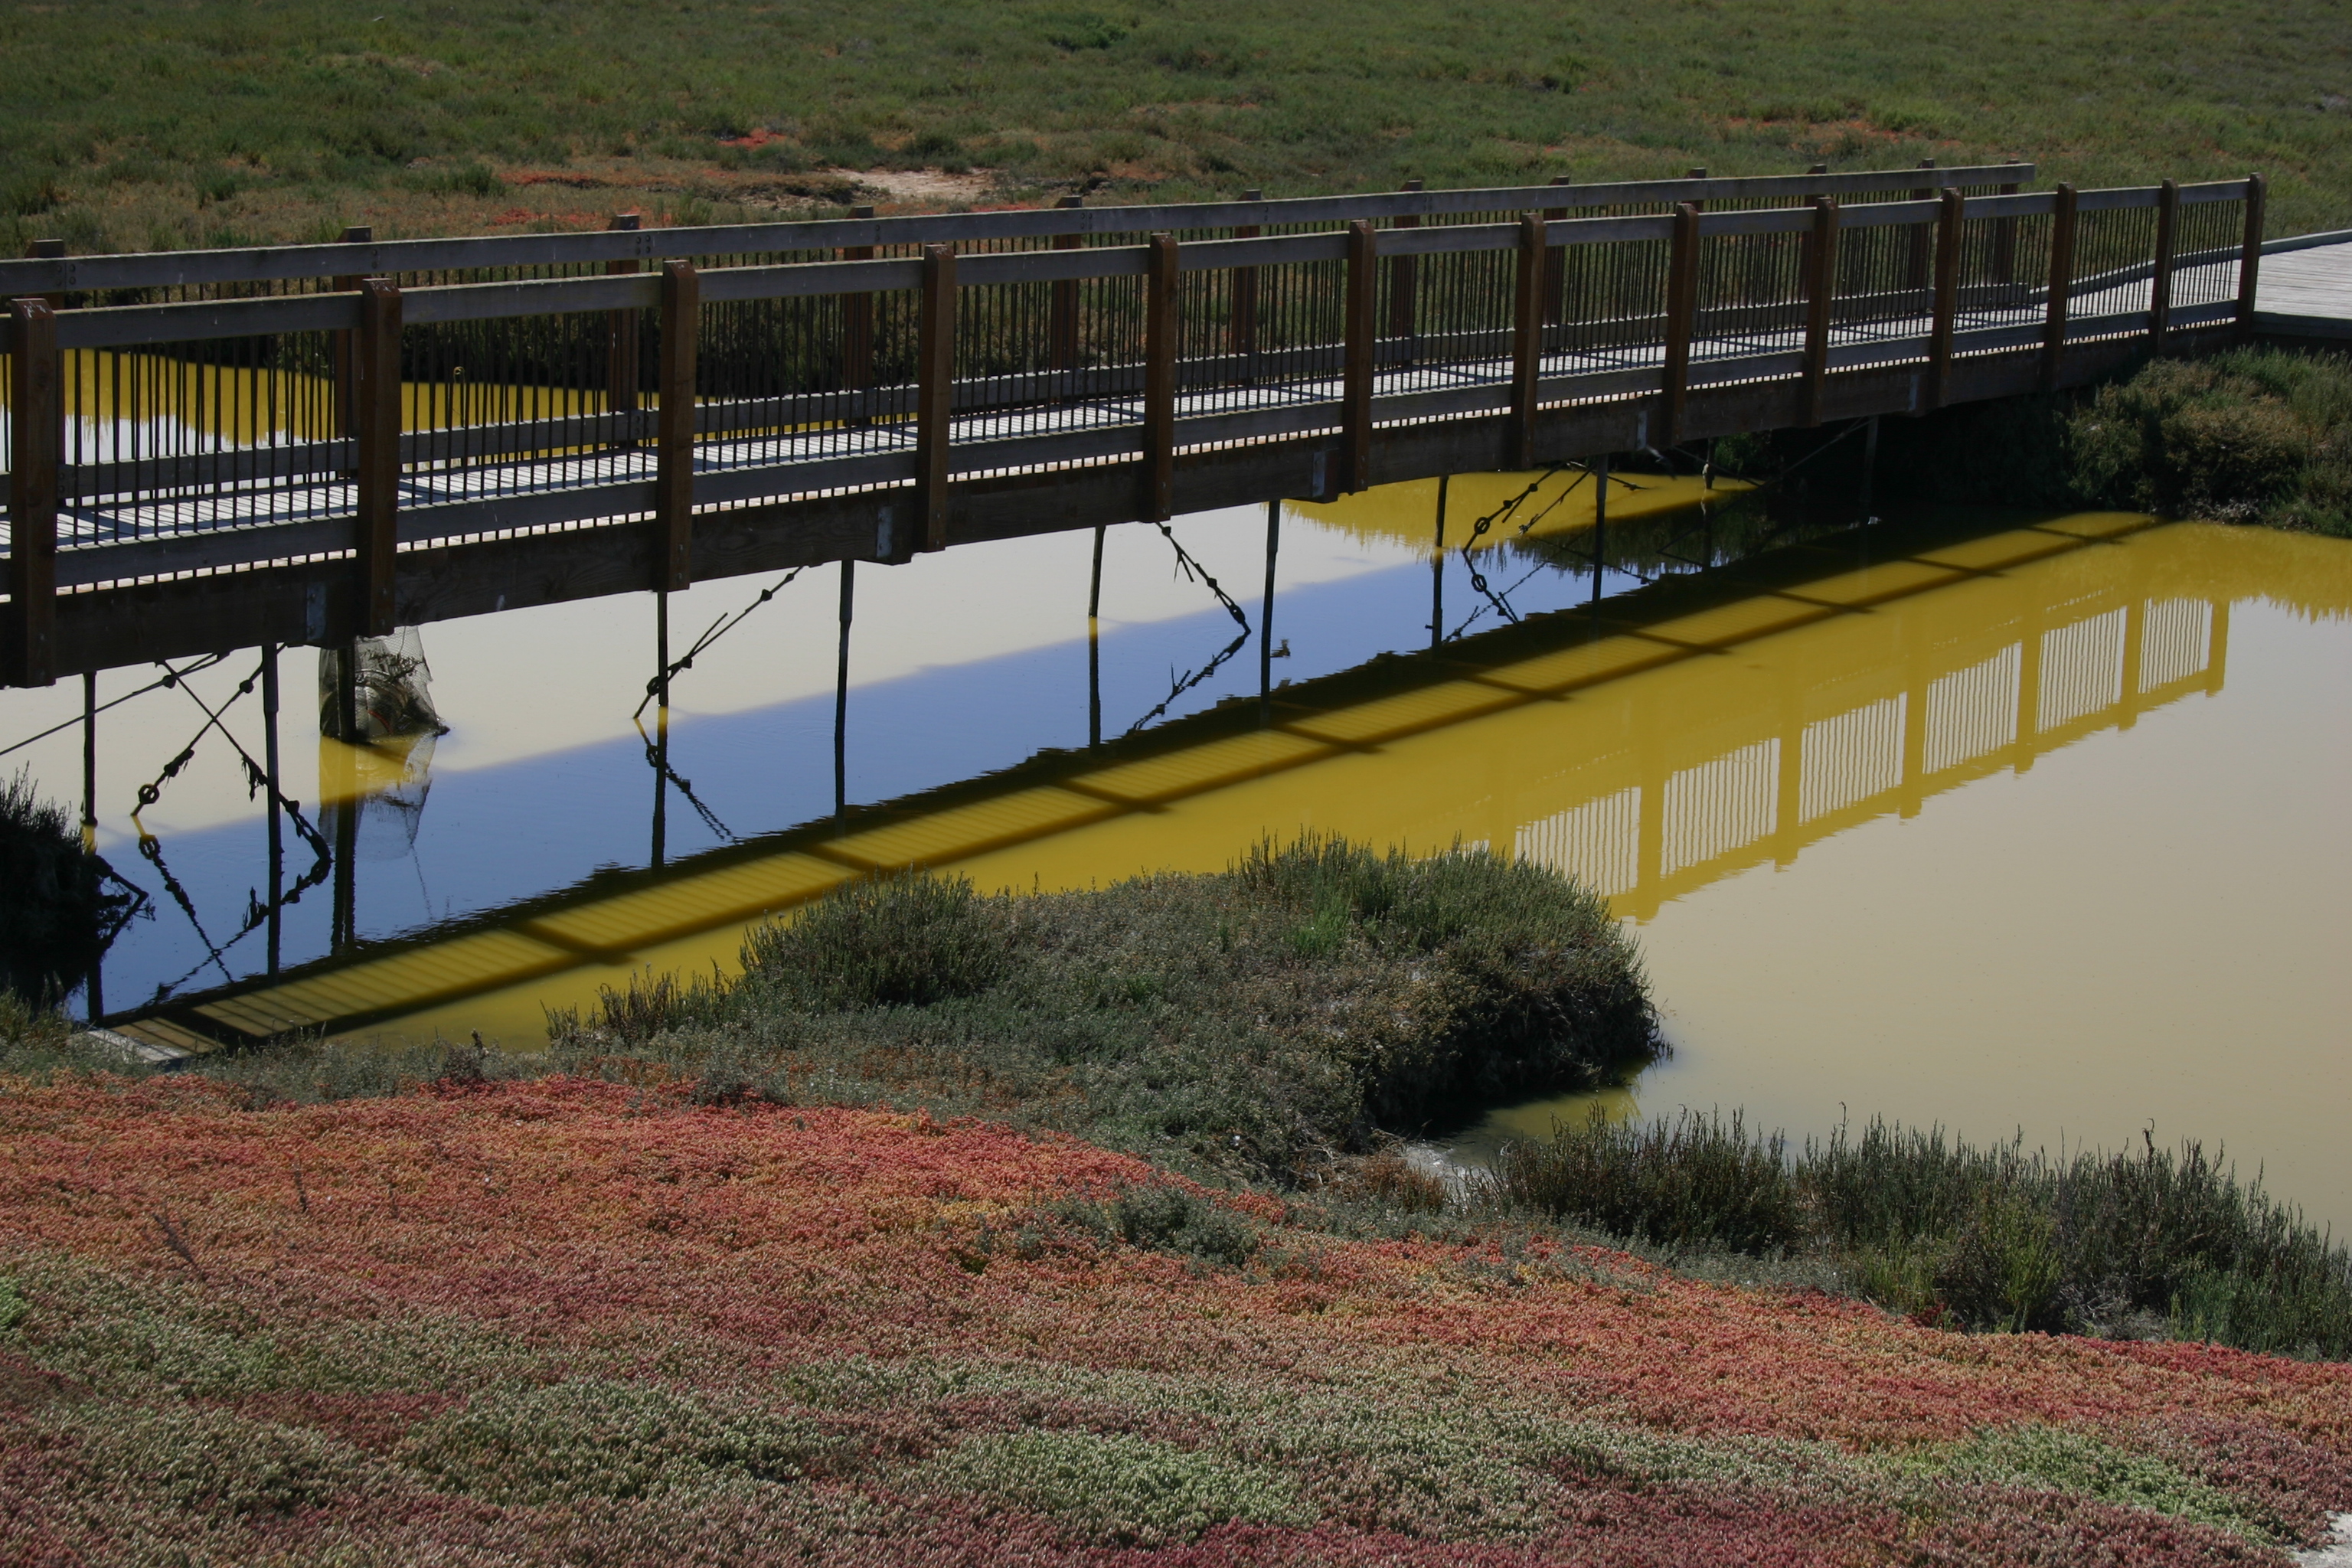 A boardwalk bridge spans the stagnant green water of a salt marsh near a colorful bank.